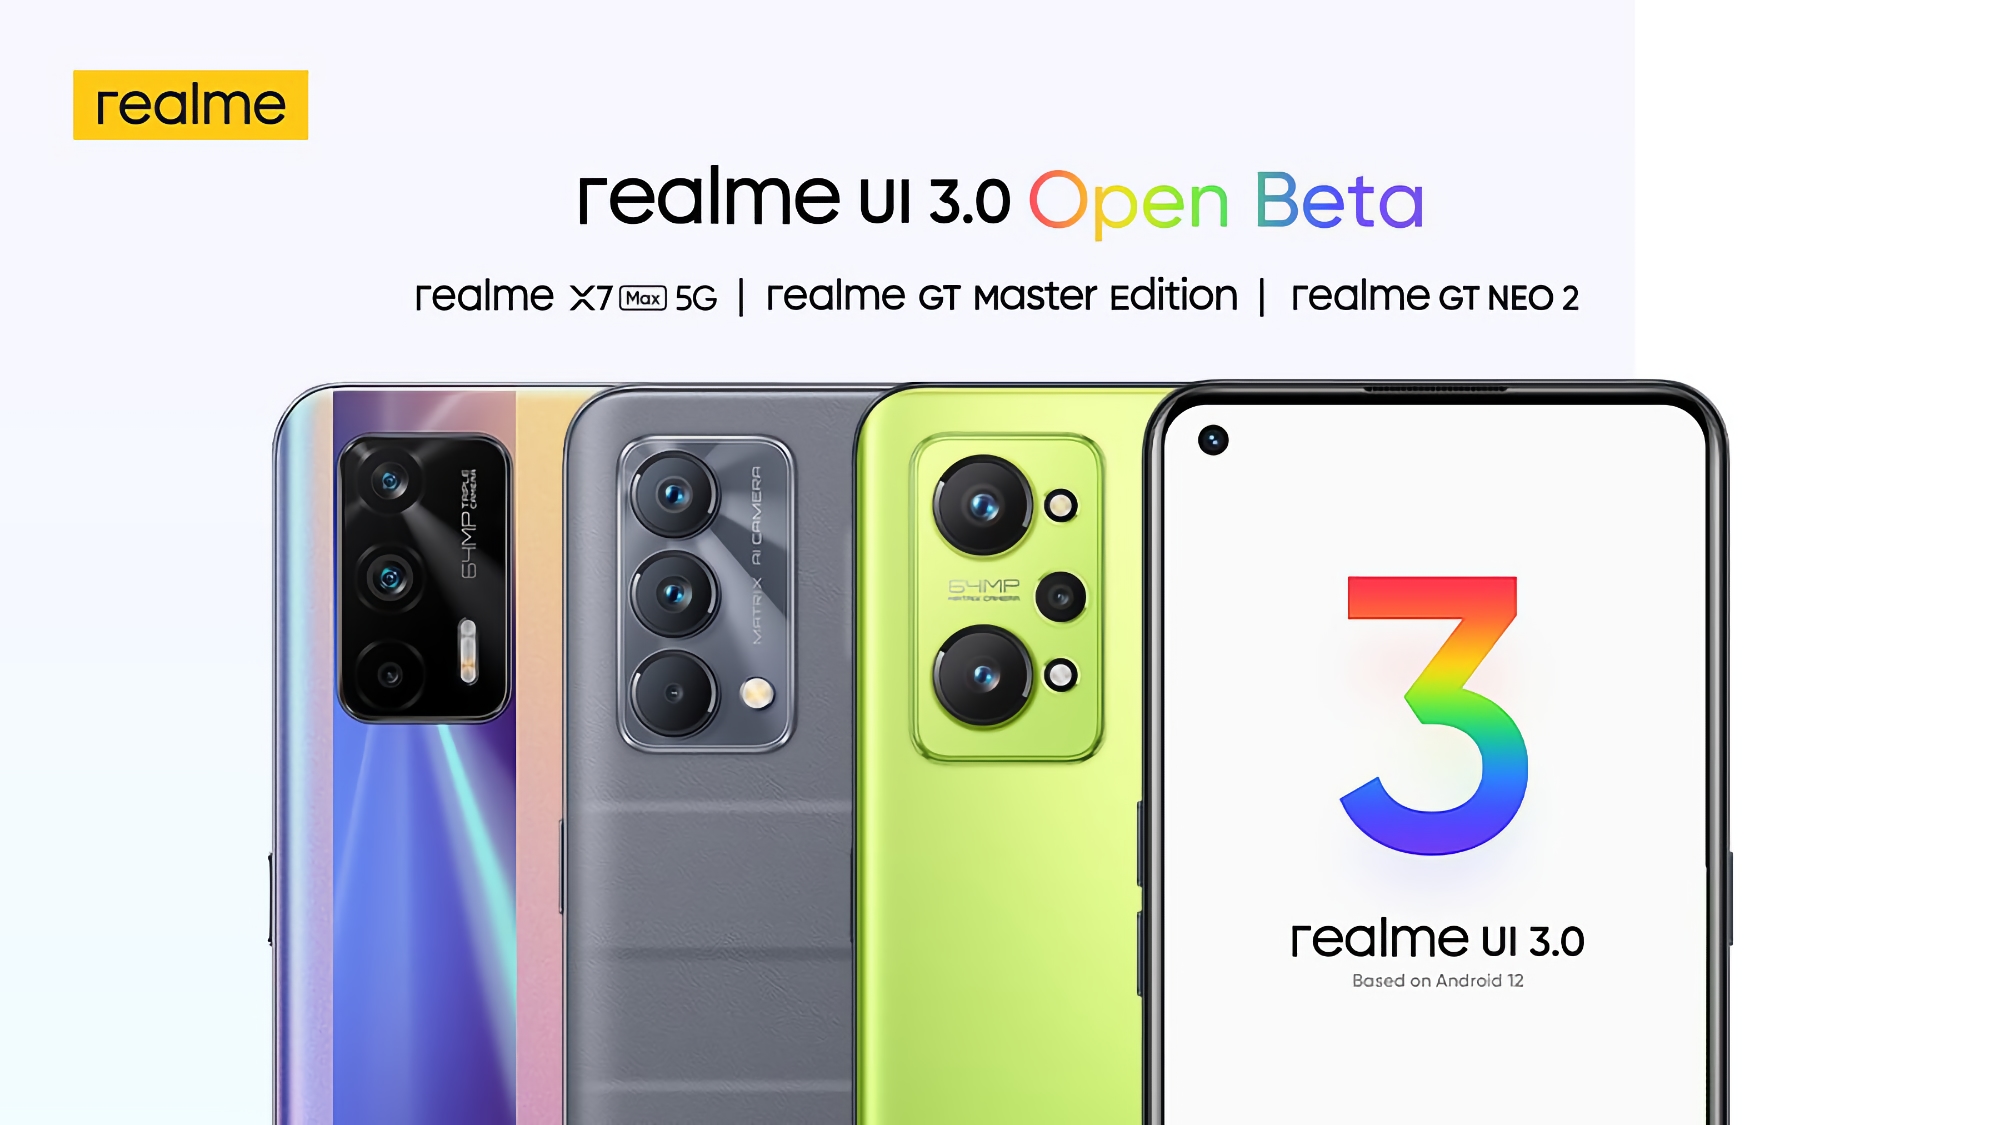 Not only realme GT Master Edition: realme GT Neo 2 and realme X7 Max 5G also received Android 12 beta with realme UI 3.0